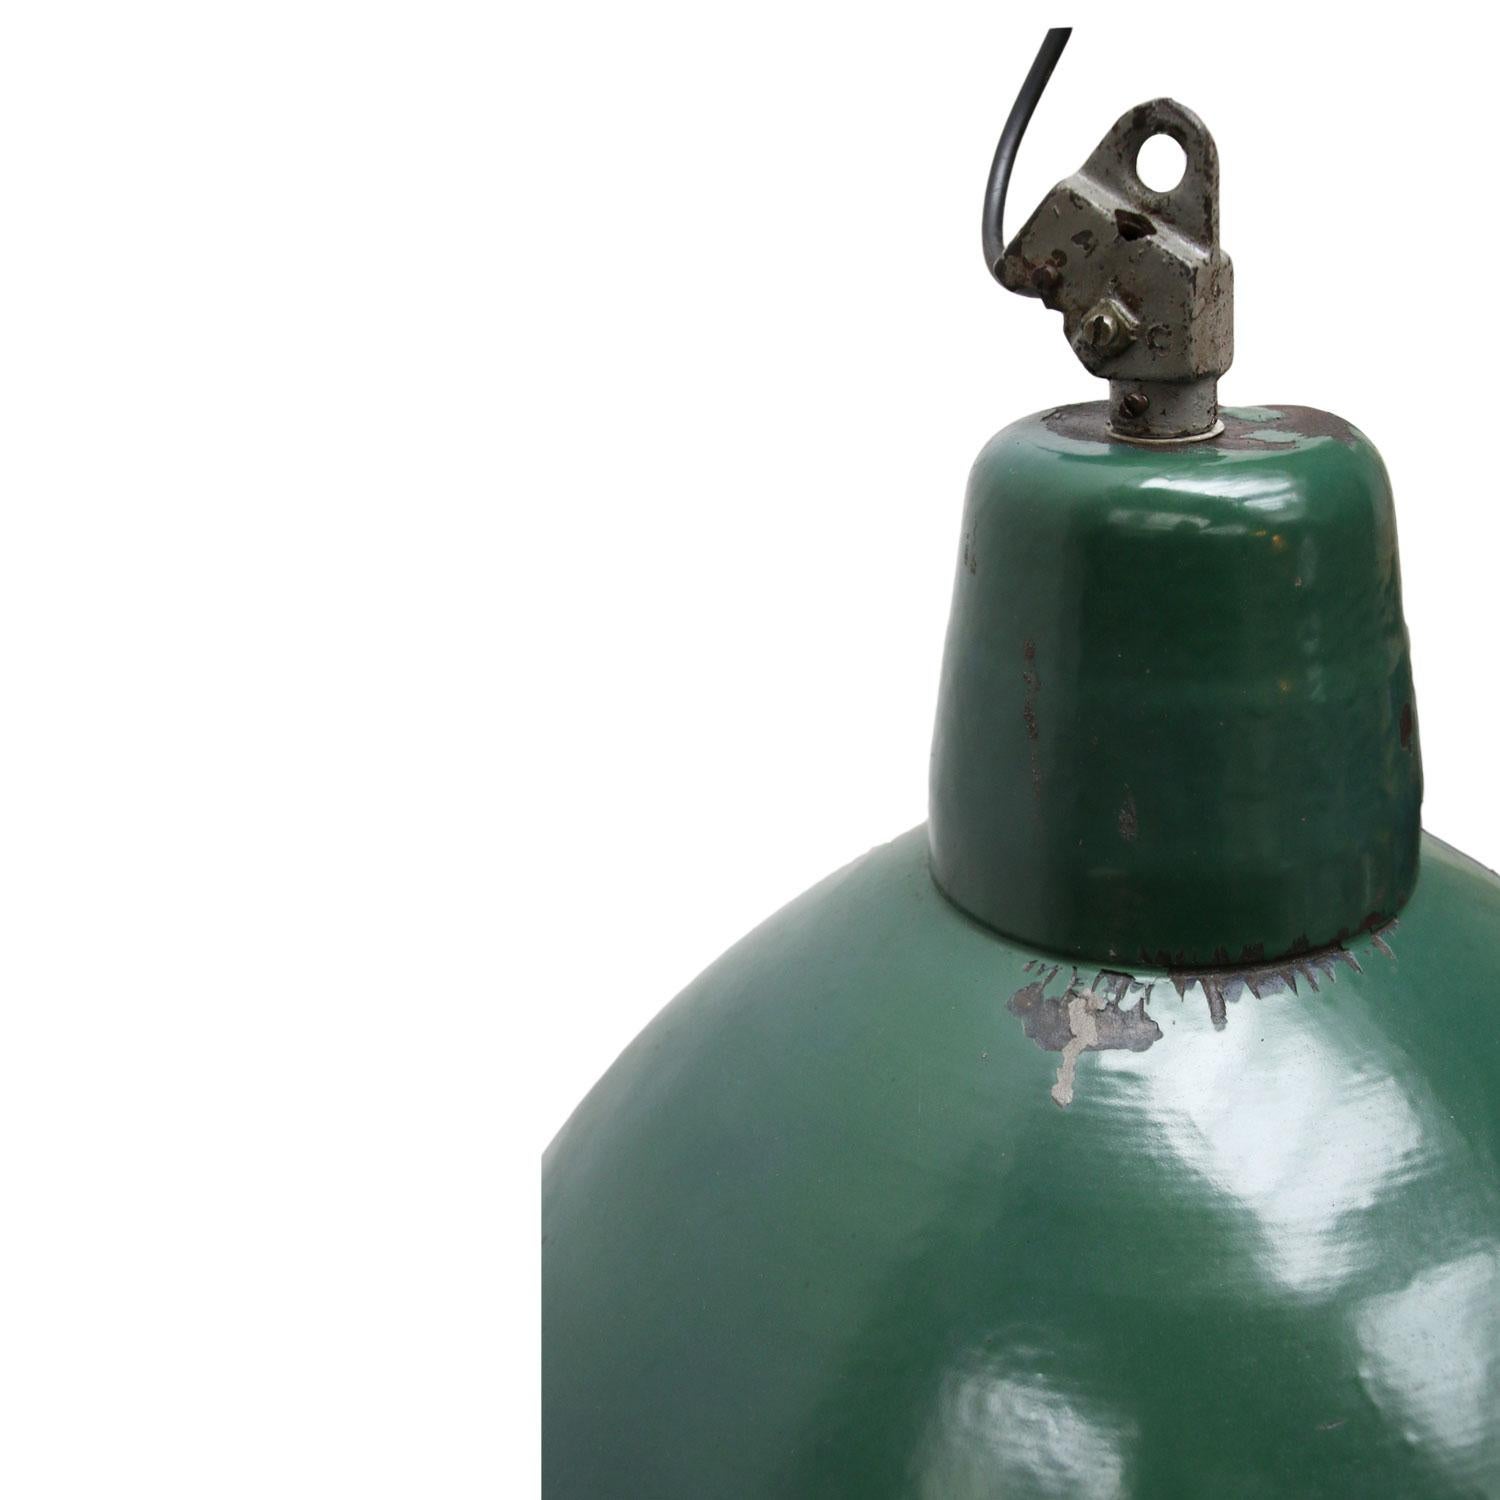 Extra large industrial classic used in warehouses and factories.
Petrol enamel, cast iron hook

Weight: 3.00 kg / 6.6 lb

All lamps have been made suitable by international standards for incandescent light bulbs, energy-efficient and LED bulbs.